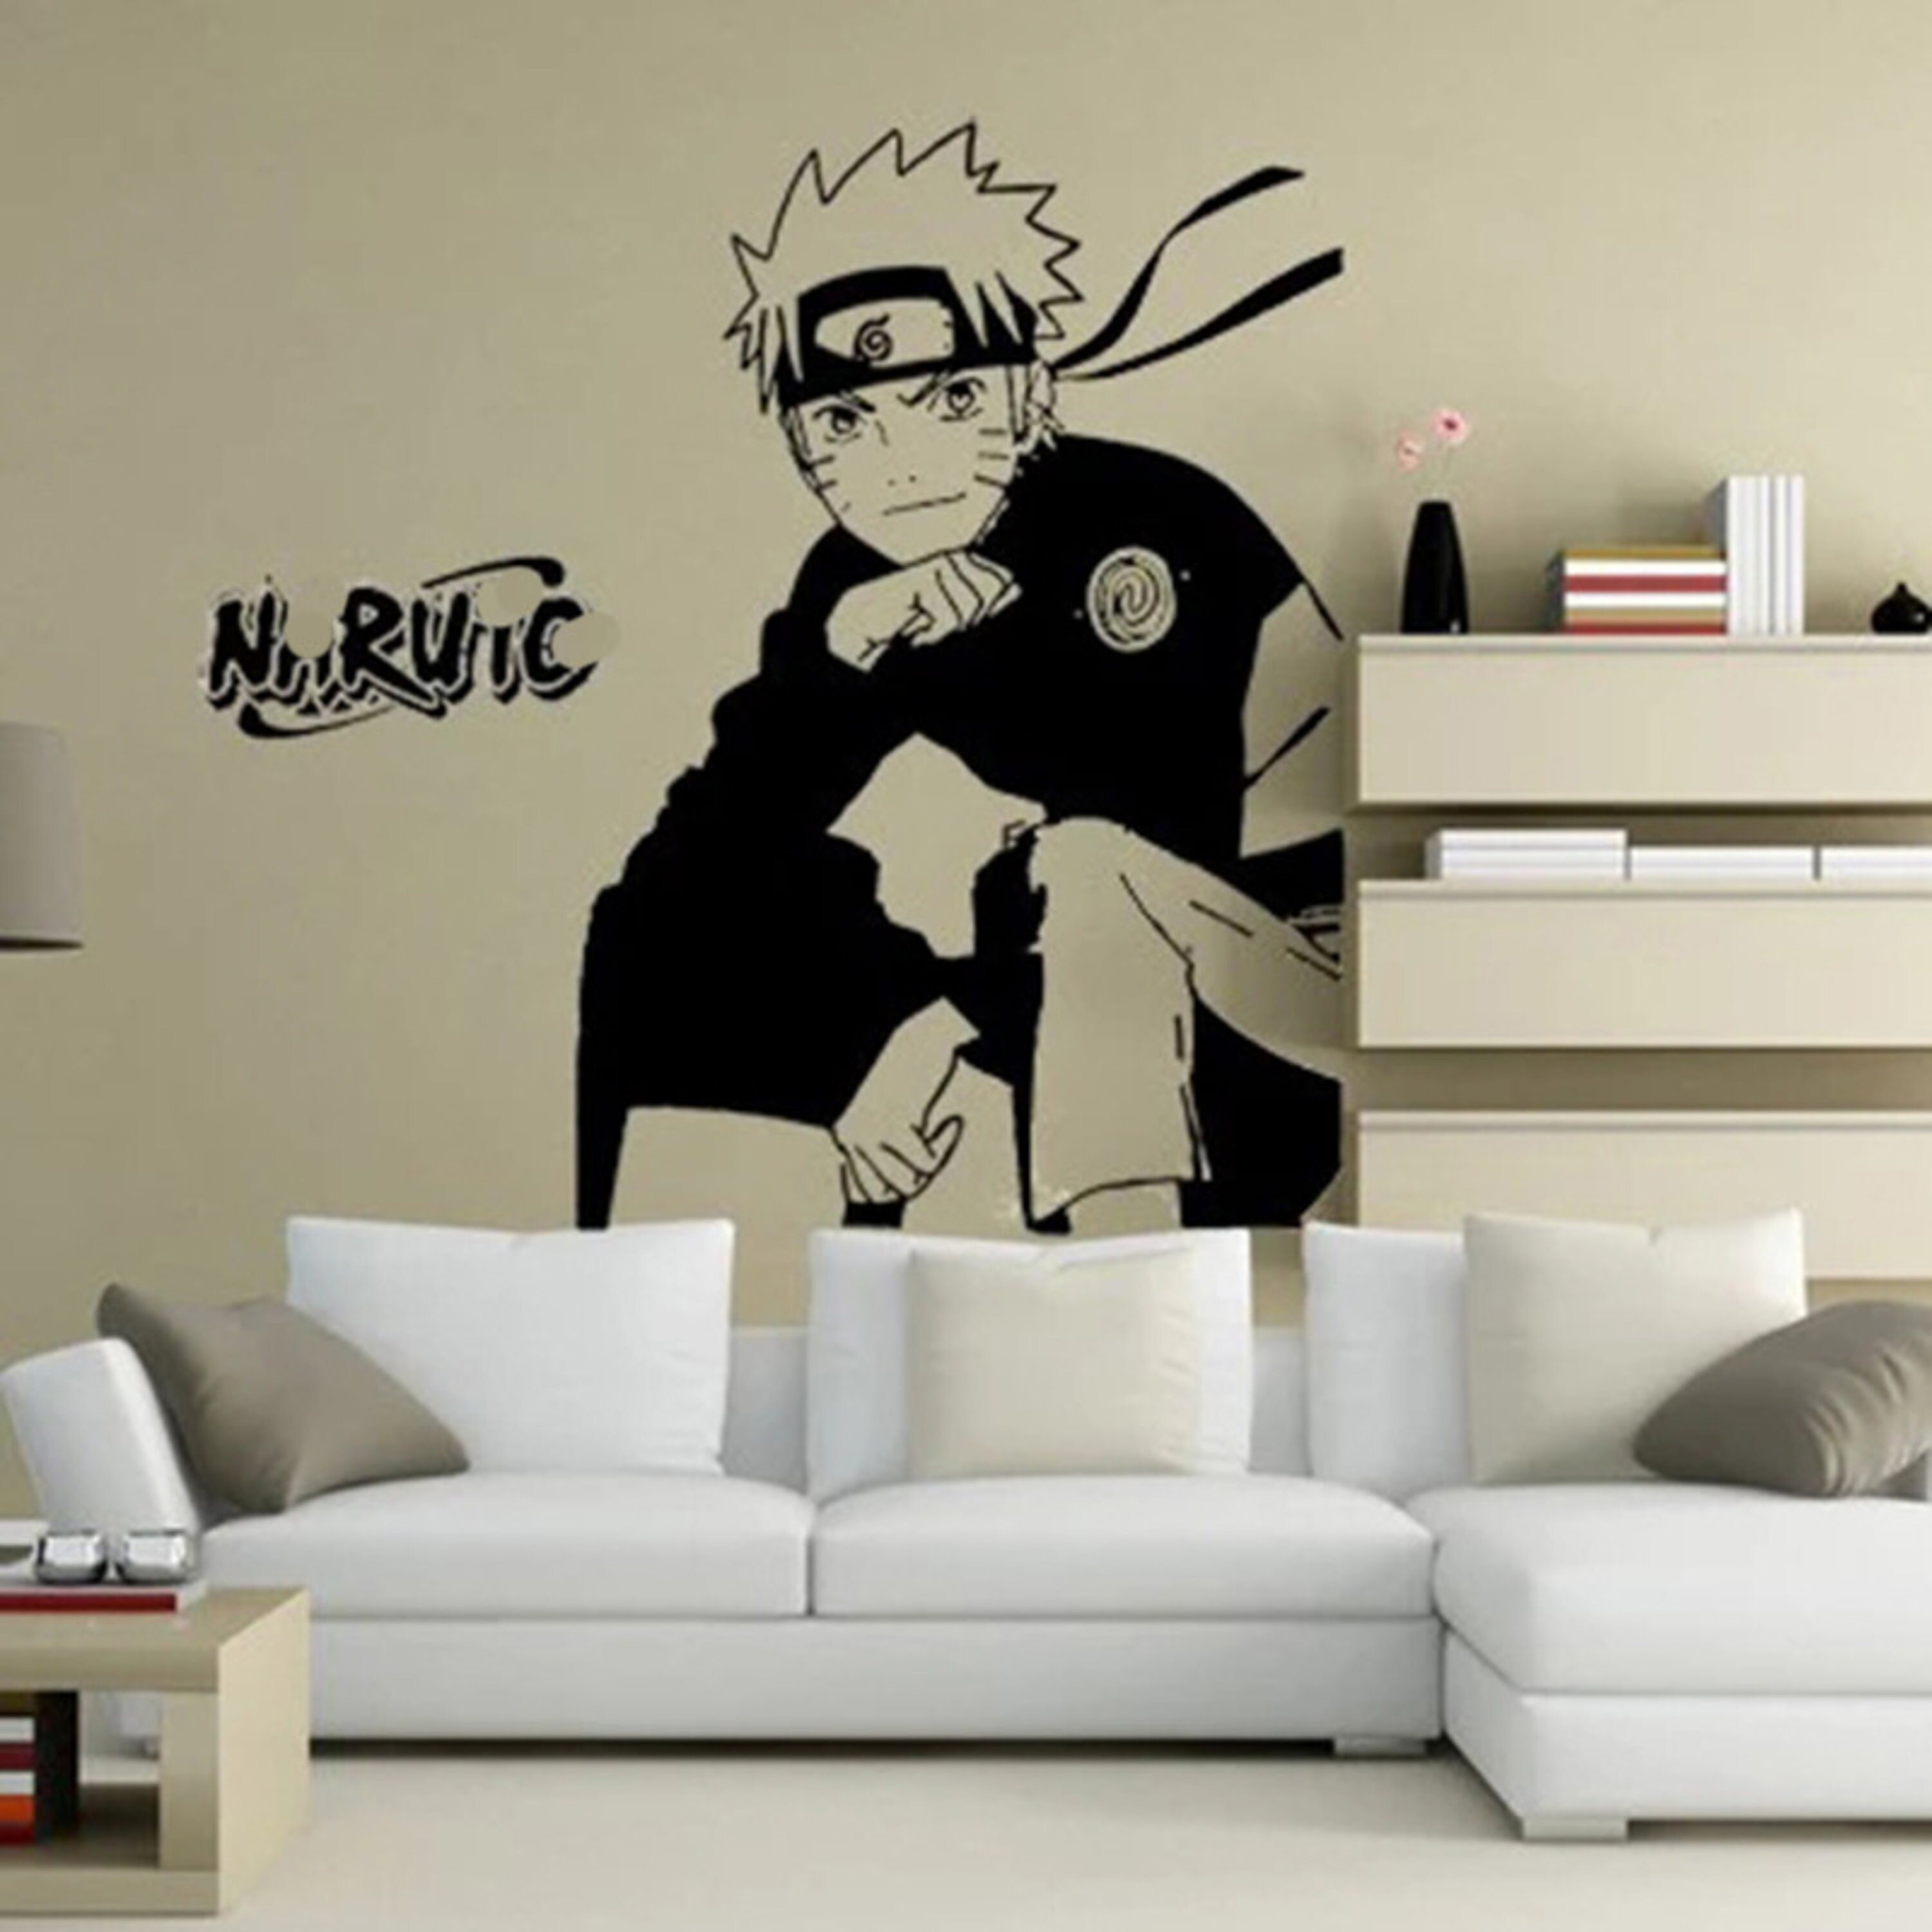 Anime-themed interior decorative wall decals | Front Signs